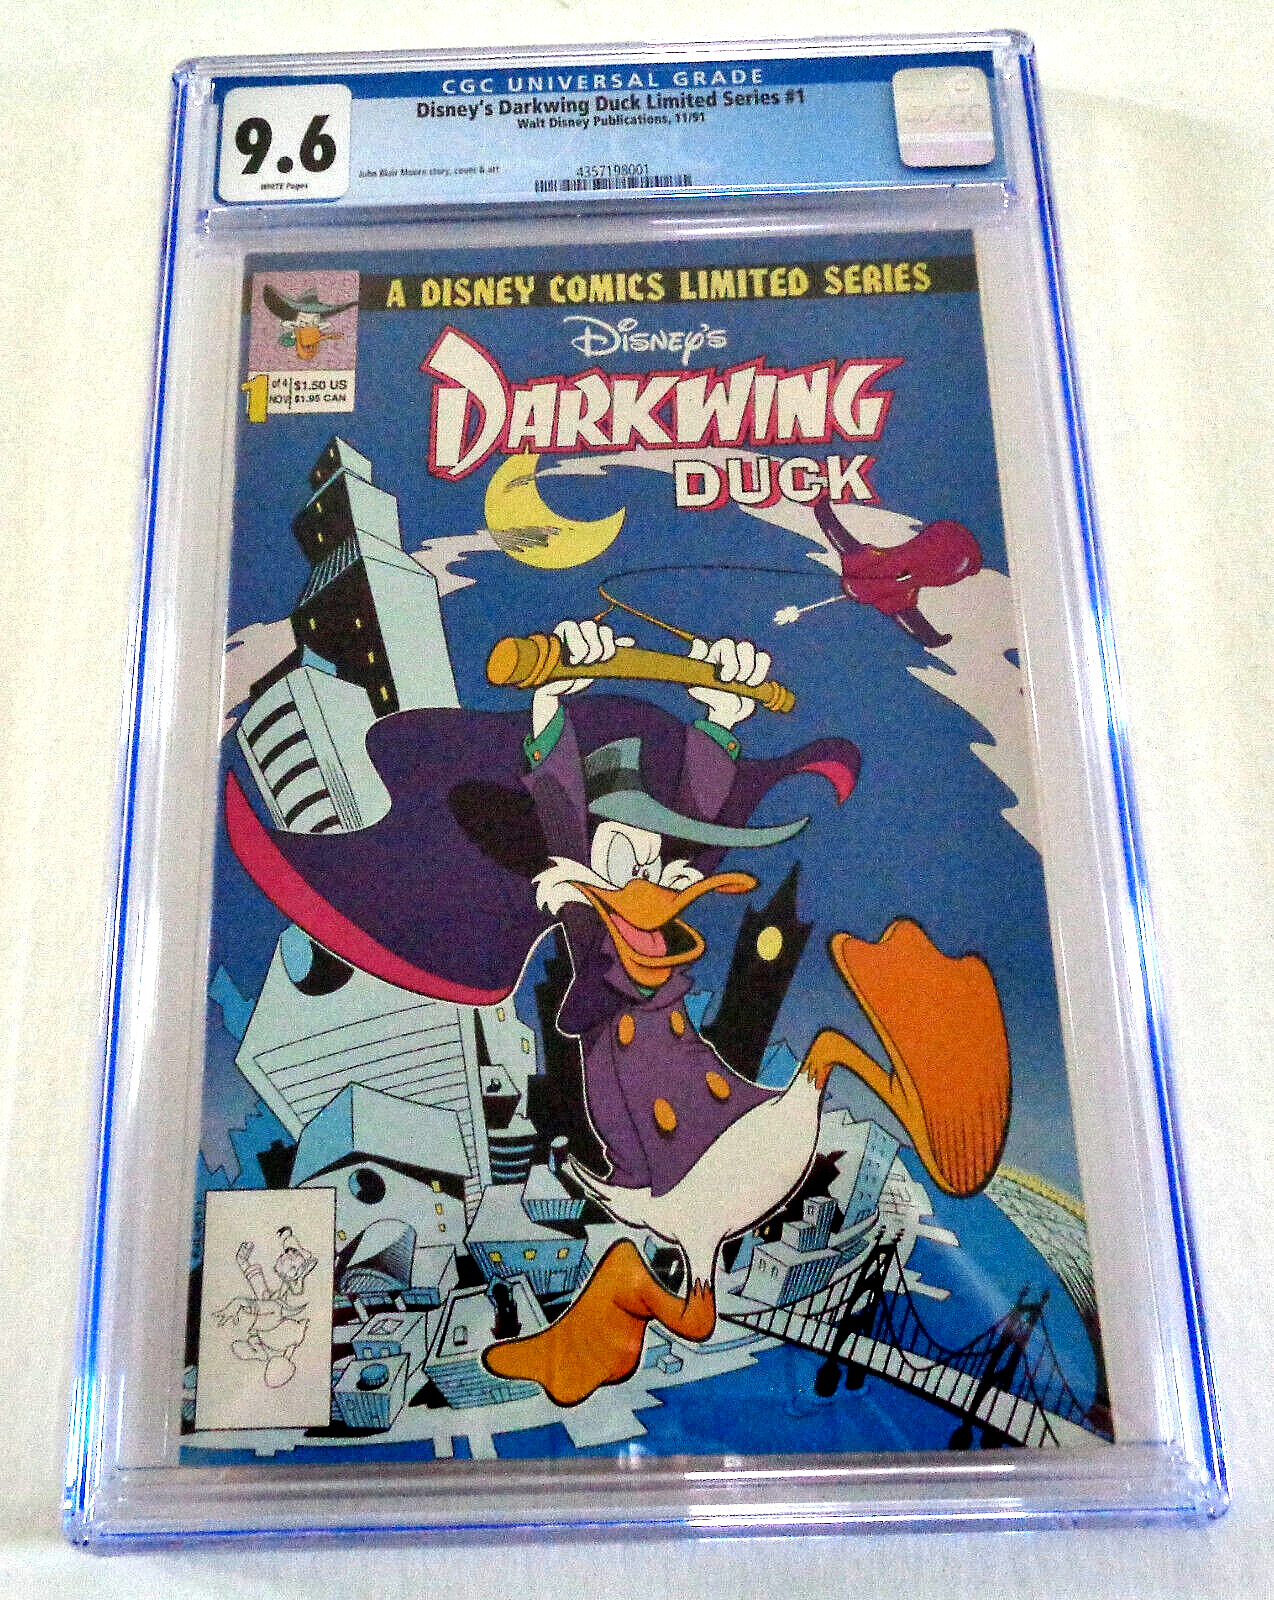 DISNEY\'S DARKWING DUCK LIMITED SERIES #1 1991 CGC 9.6 1st APPEARANCE JOHN MOORE